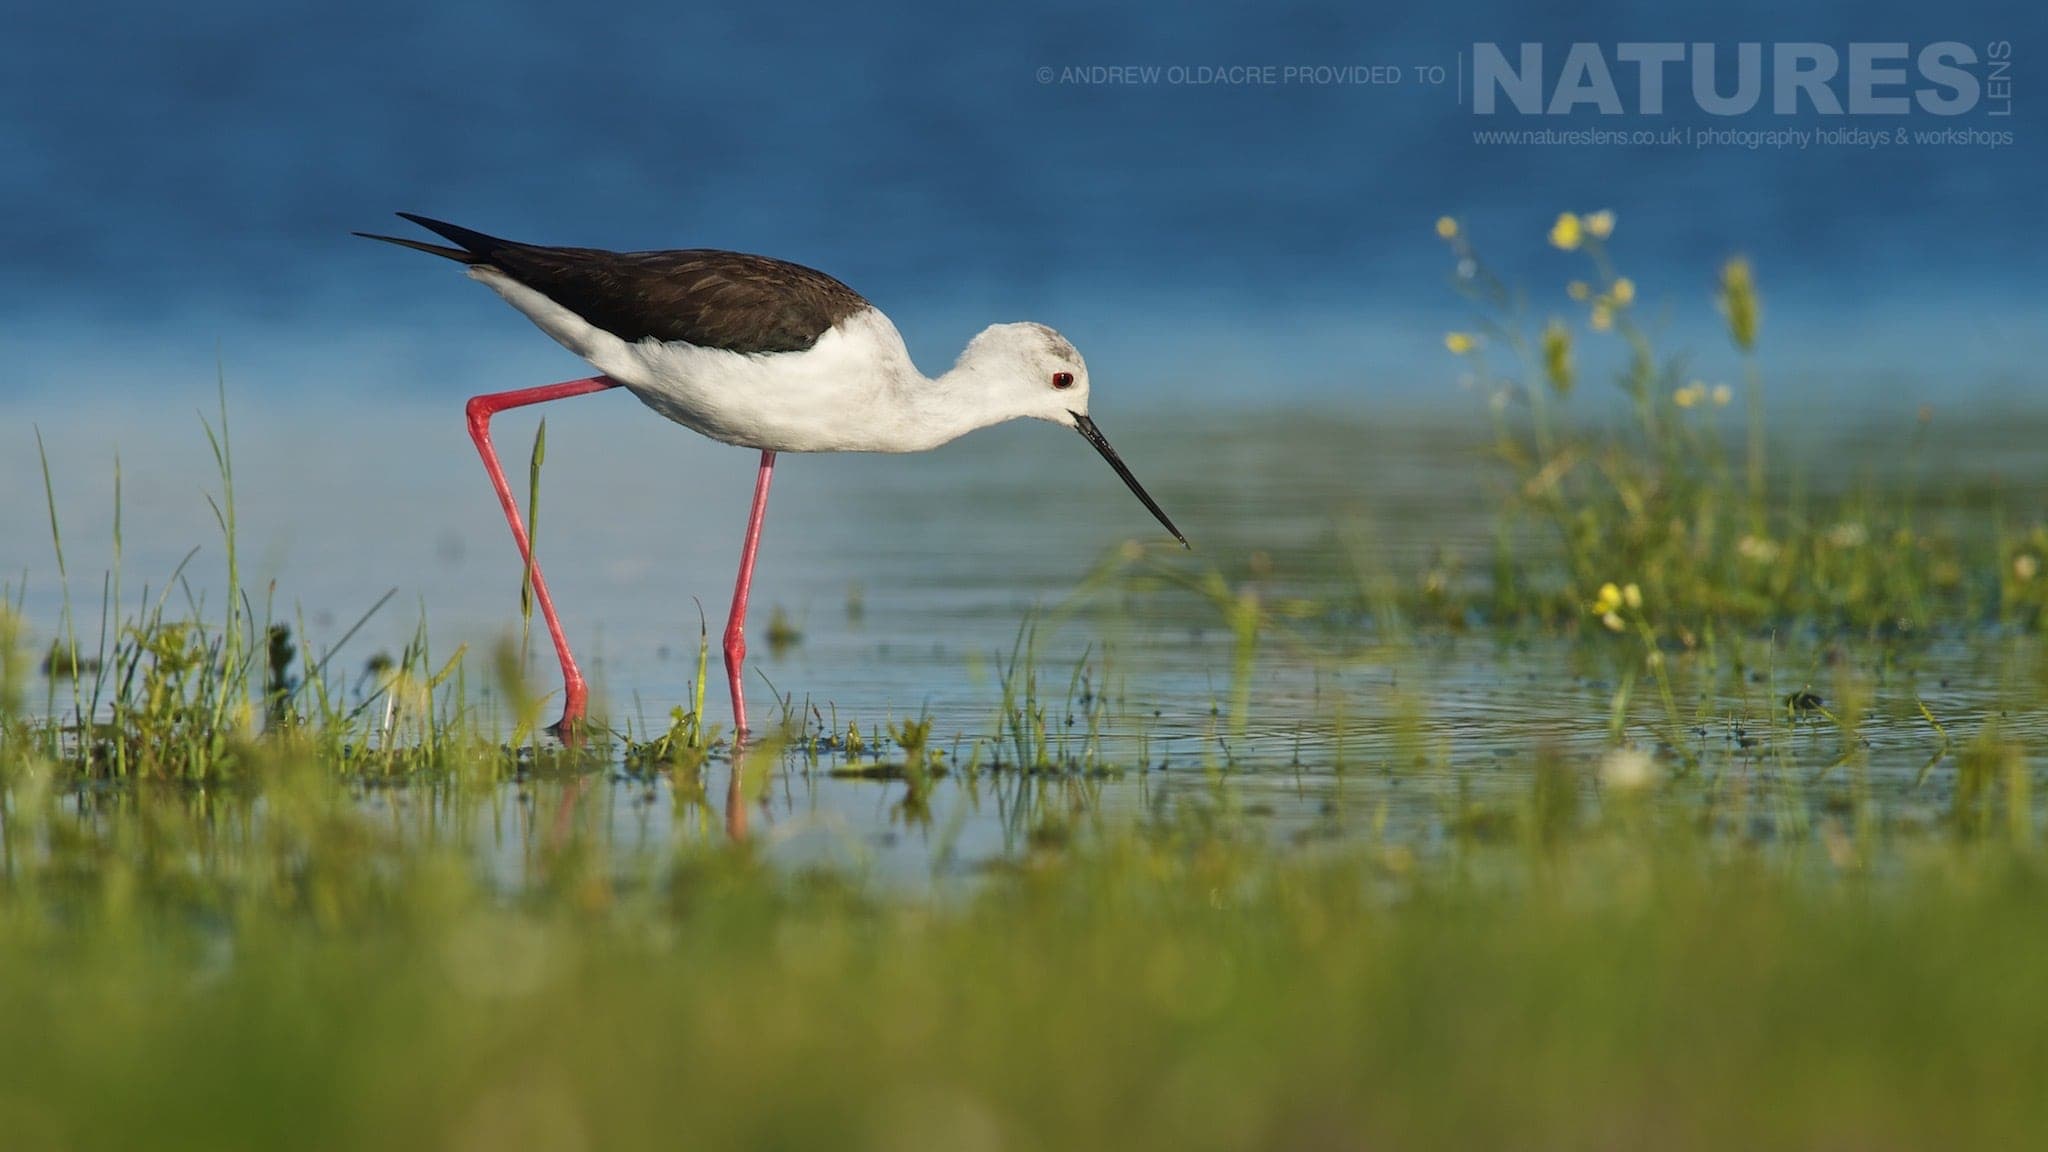 A Black Winged Stilt walks along the shoreline photographed from a lake side hide photographed on the NaturesLens Birds of Calera Photography Holiday